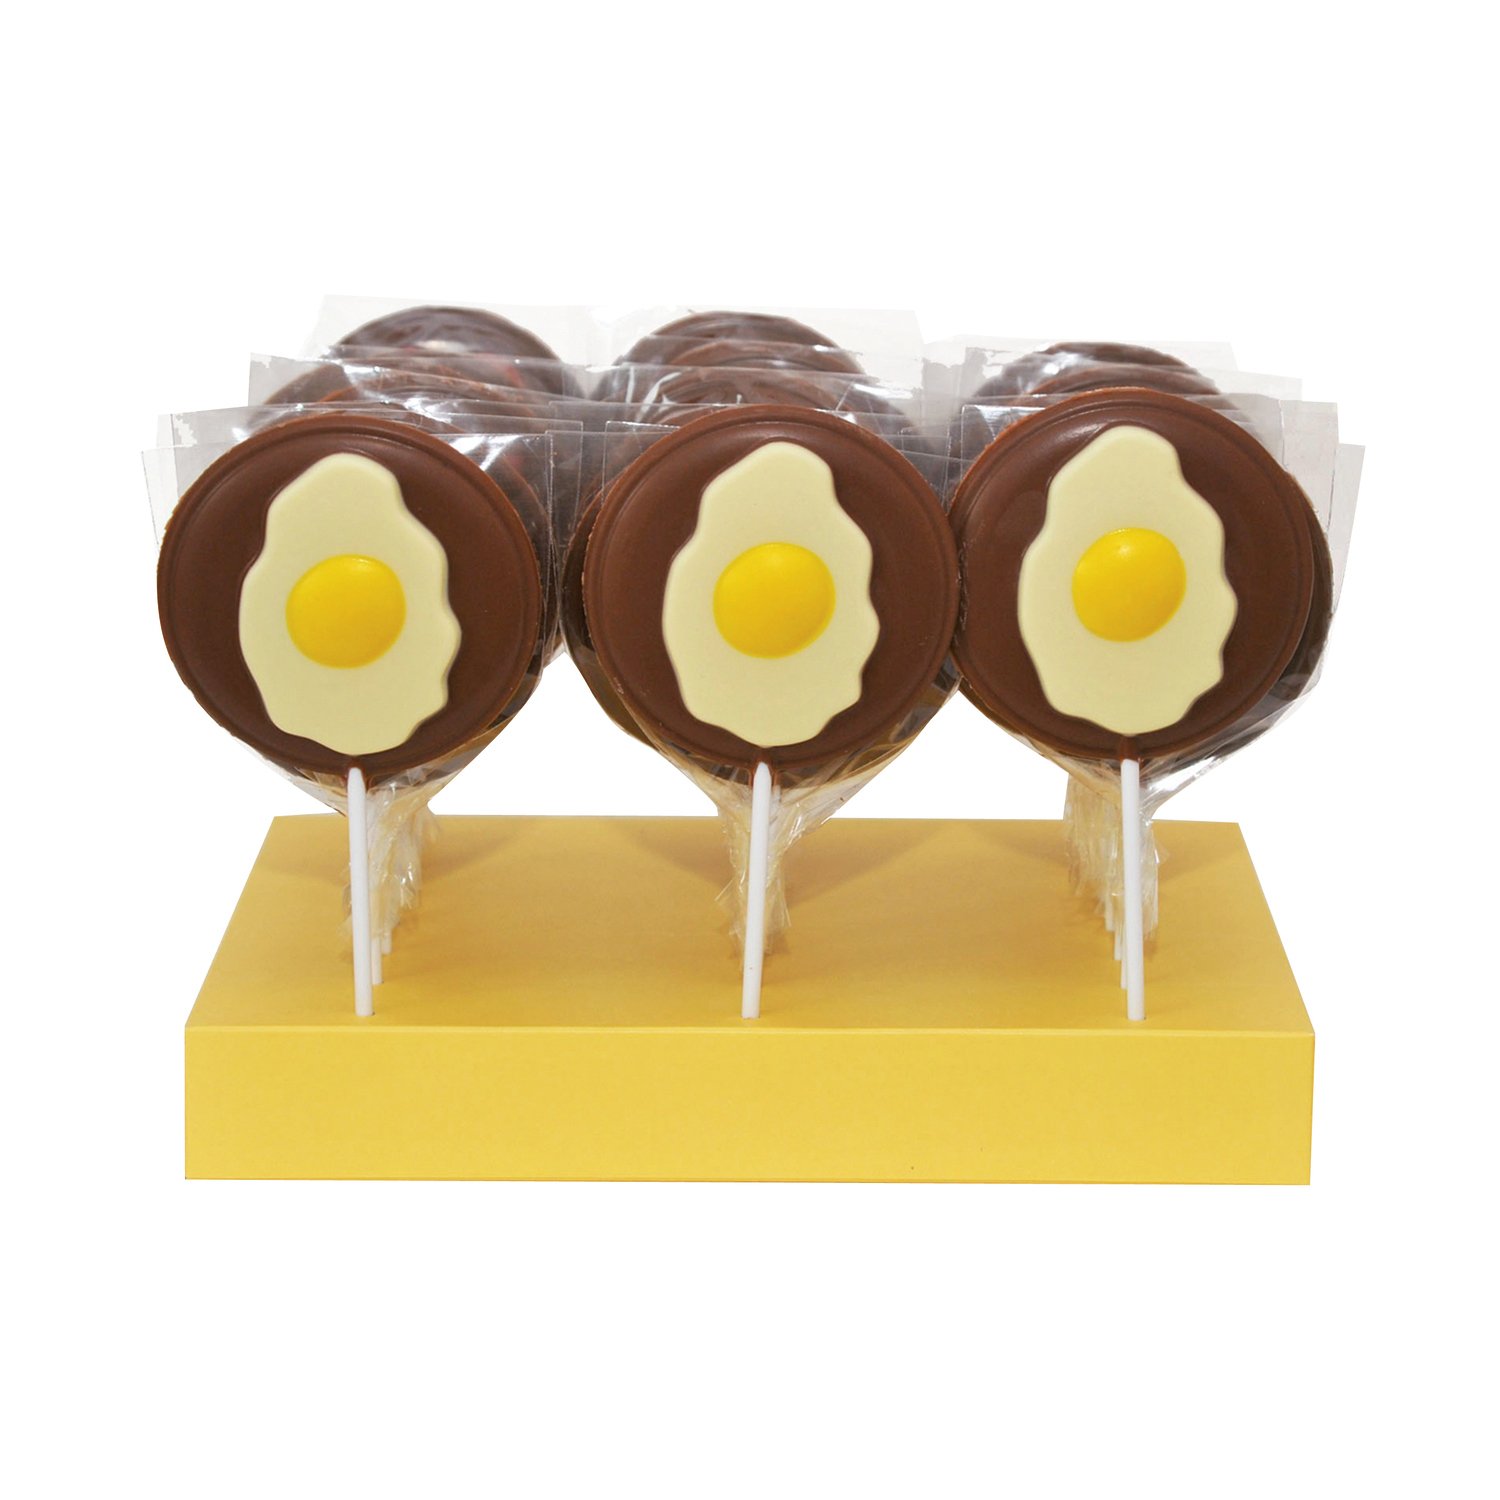 Fried Egg hand decorated milk choc lollies in display - 24x50g